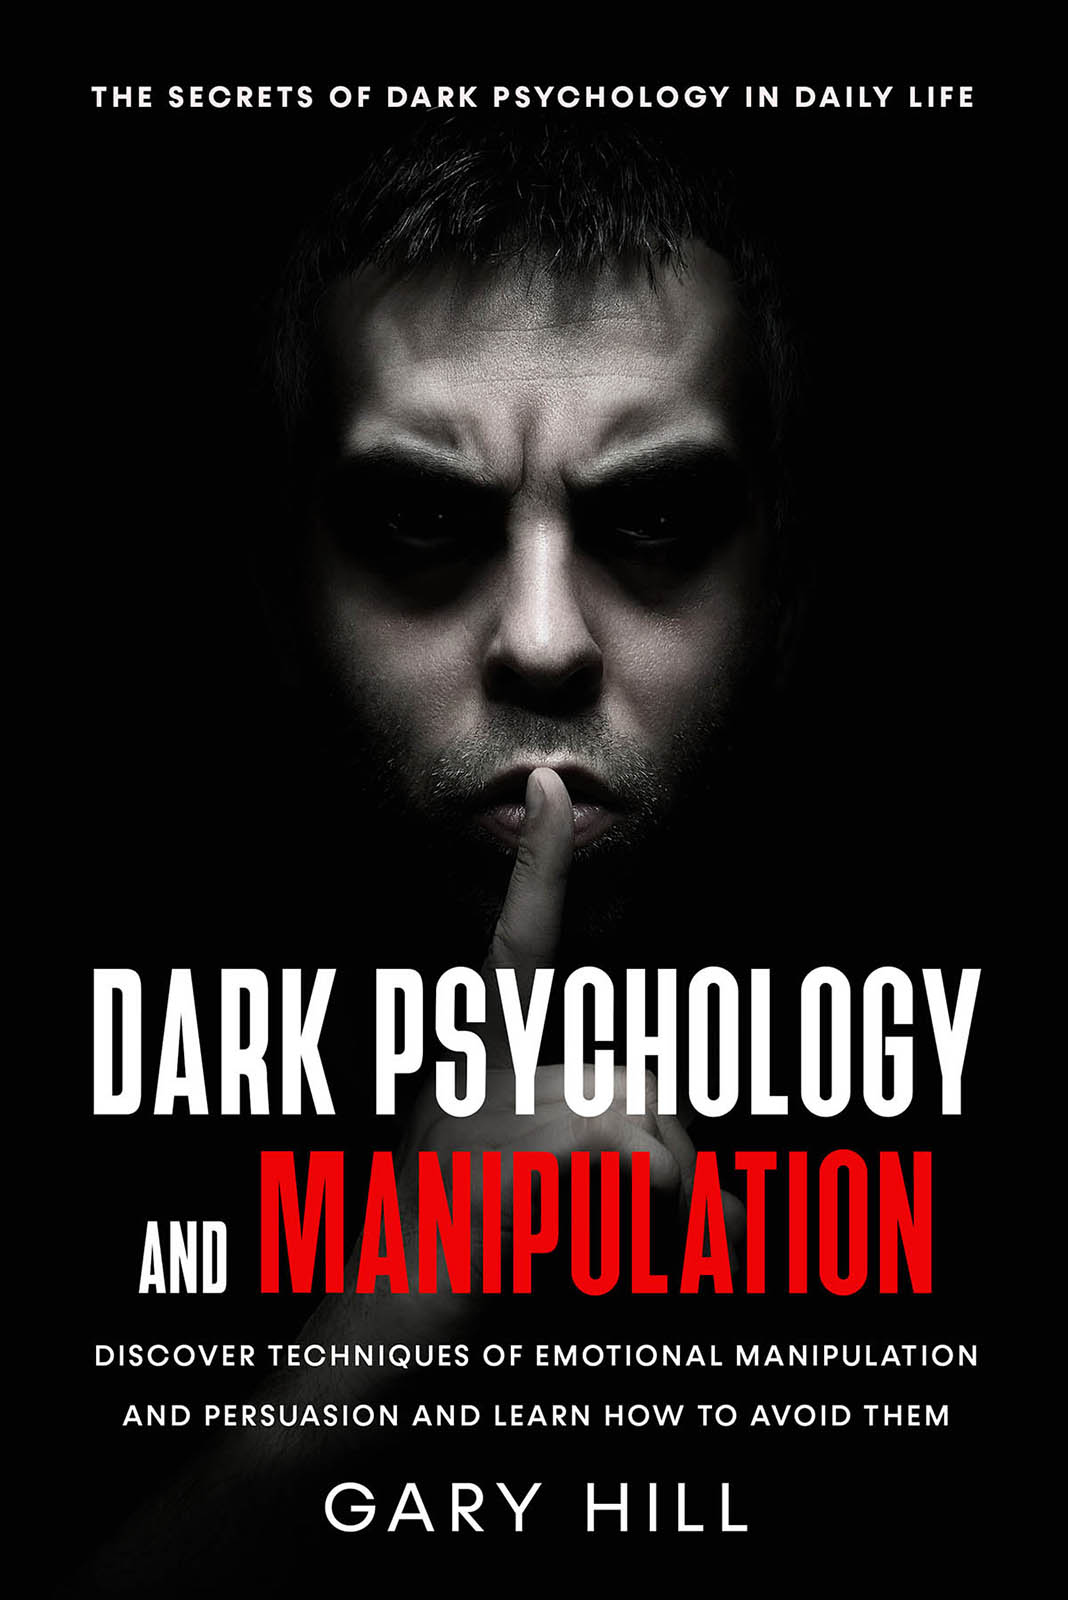 FREE: Dark Psychology and Manipulation: The Secrets of Dark Psychology in Daily Life. Discover Techniques of Emotional Manipulation and Persuasion and Learn How To Avoid Them. by Gary Hill